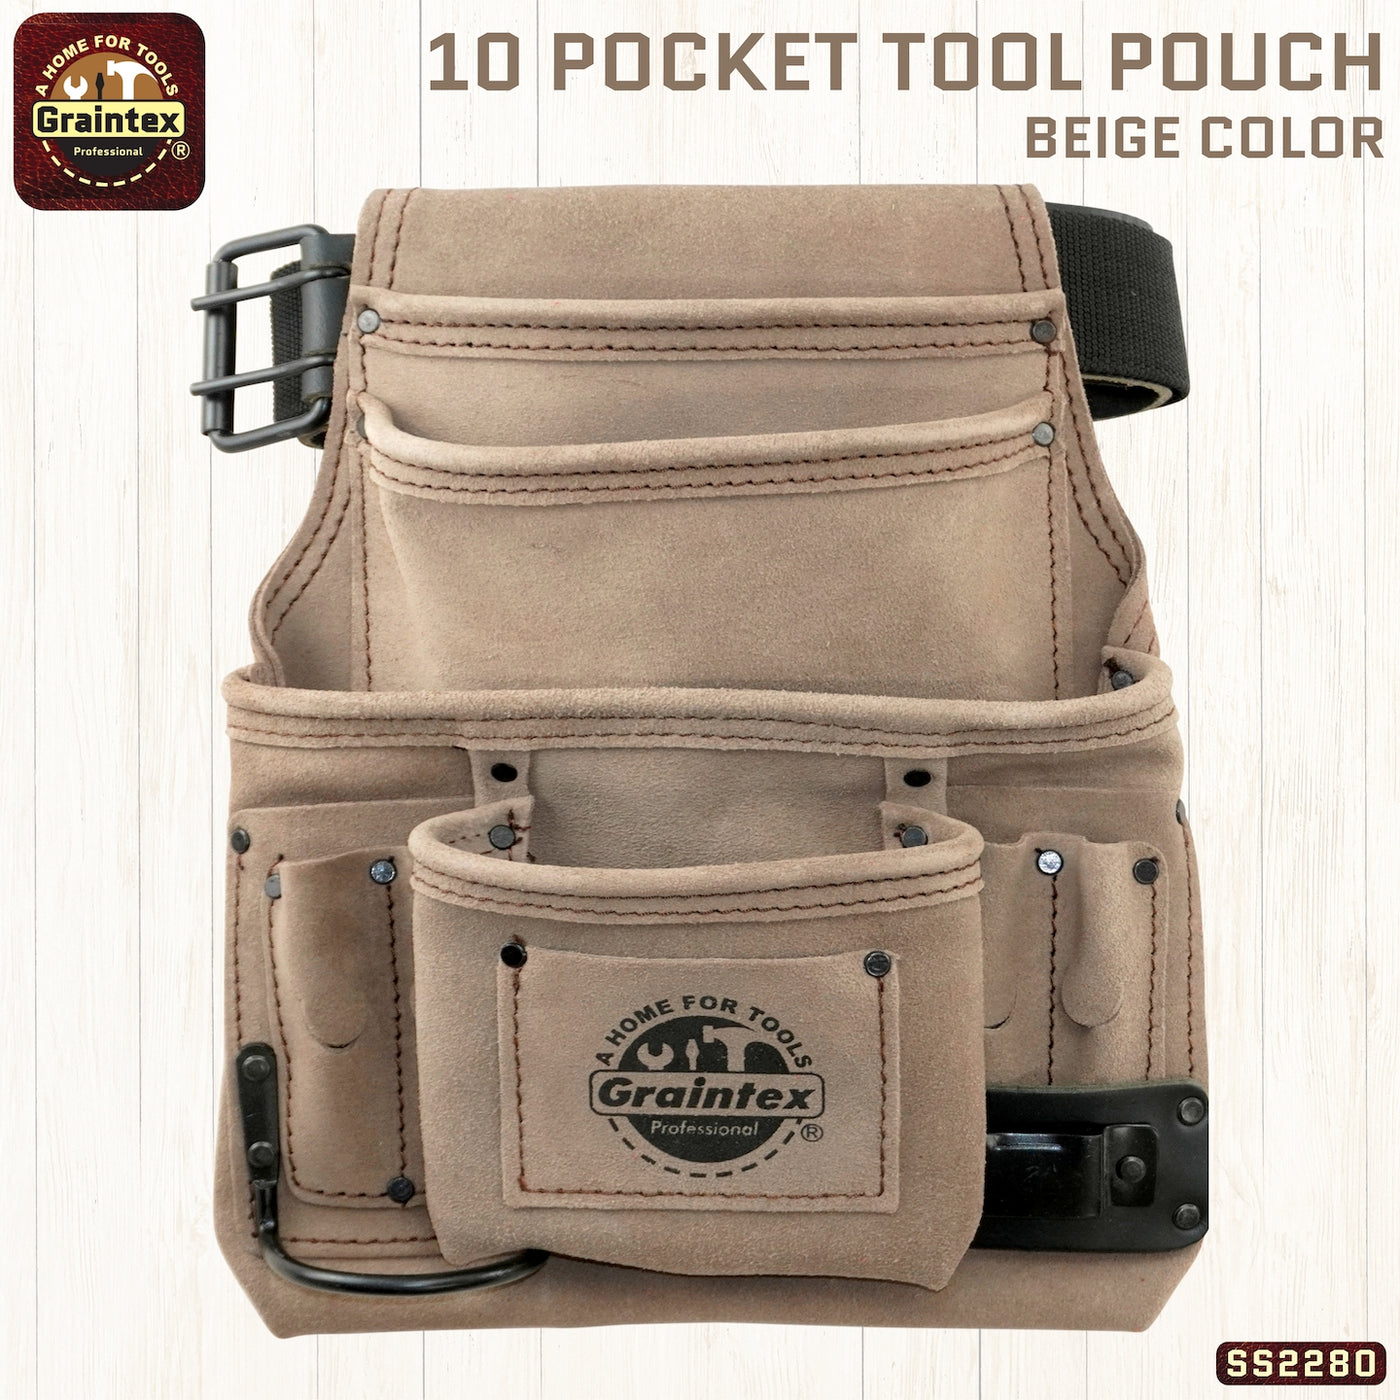 SS2280 :: 10 Pocket Nail & Tool Pouch Beige Color Suede Leather with 2" Leather/Webbing Belt